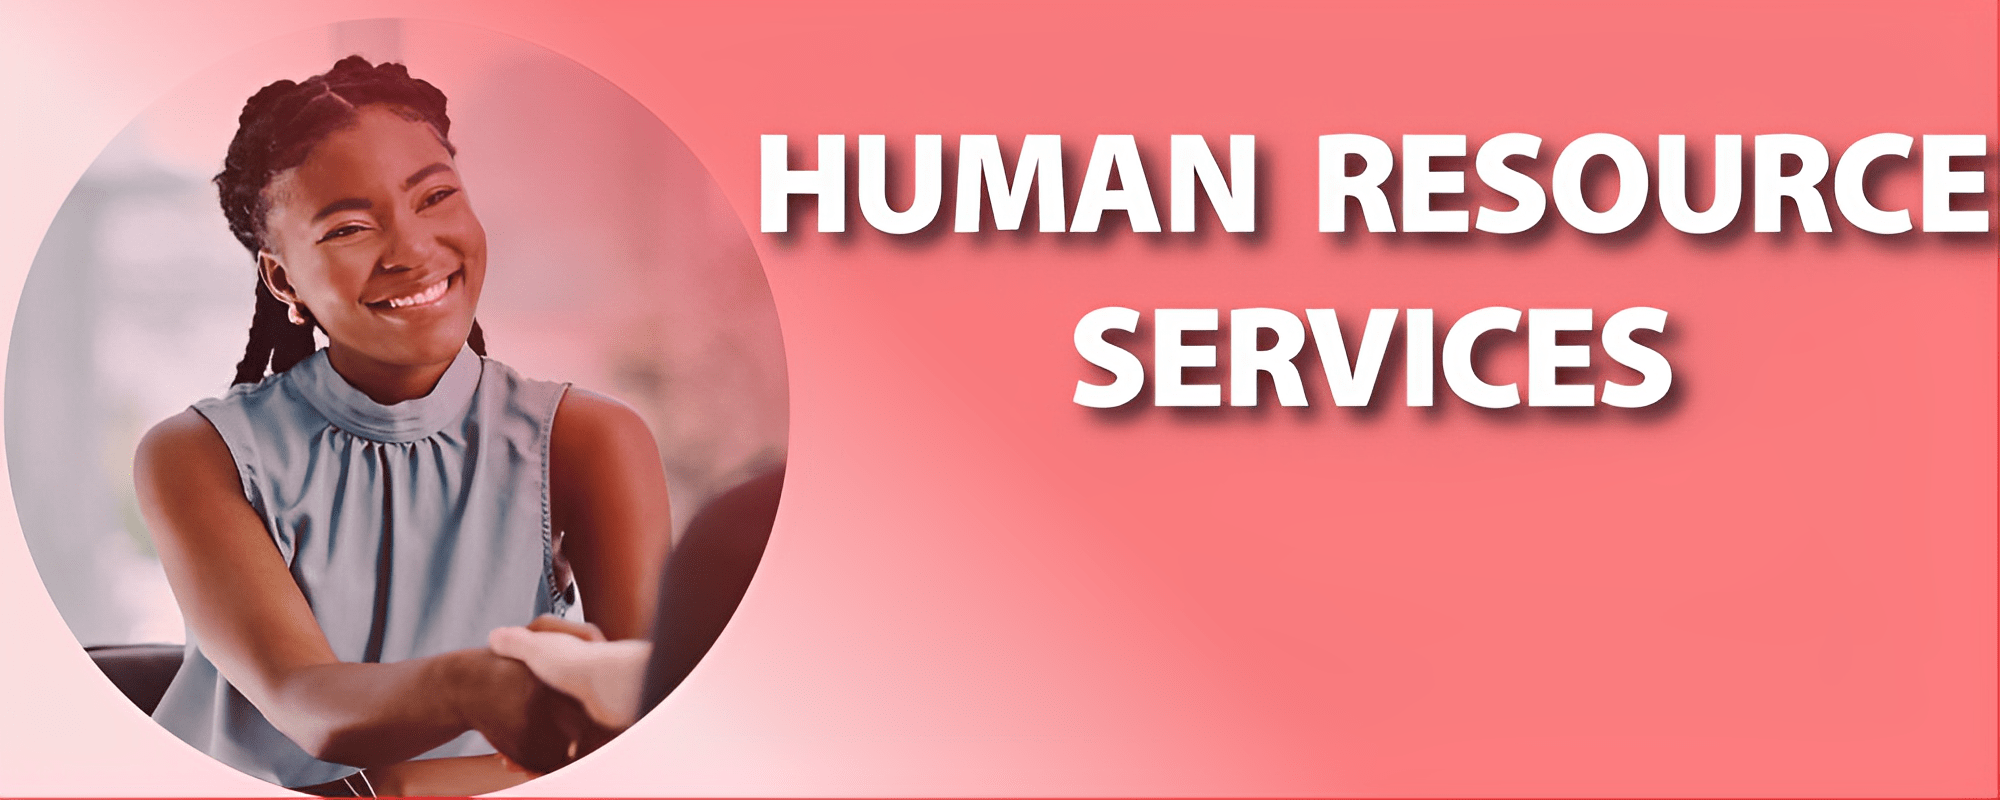 Human Resource Services in DRC